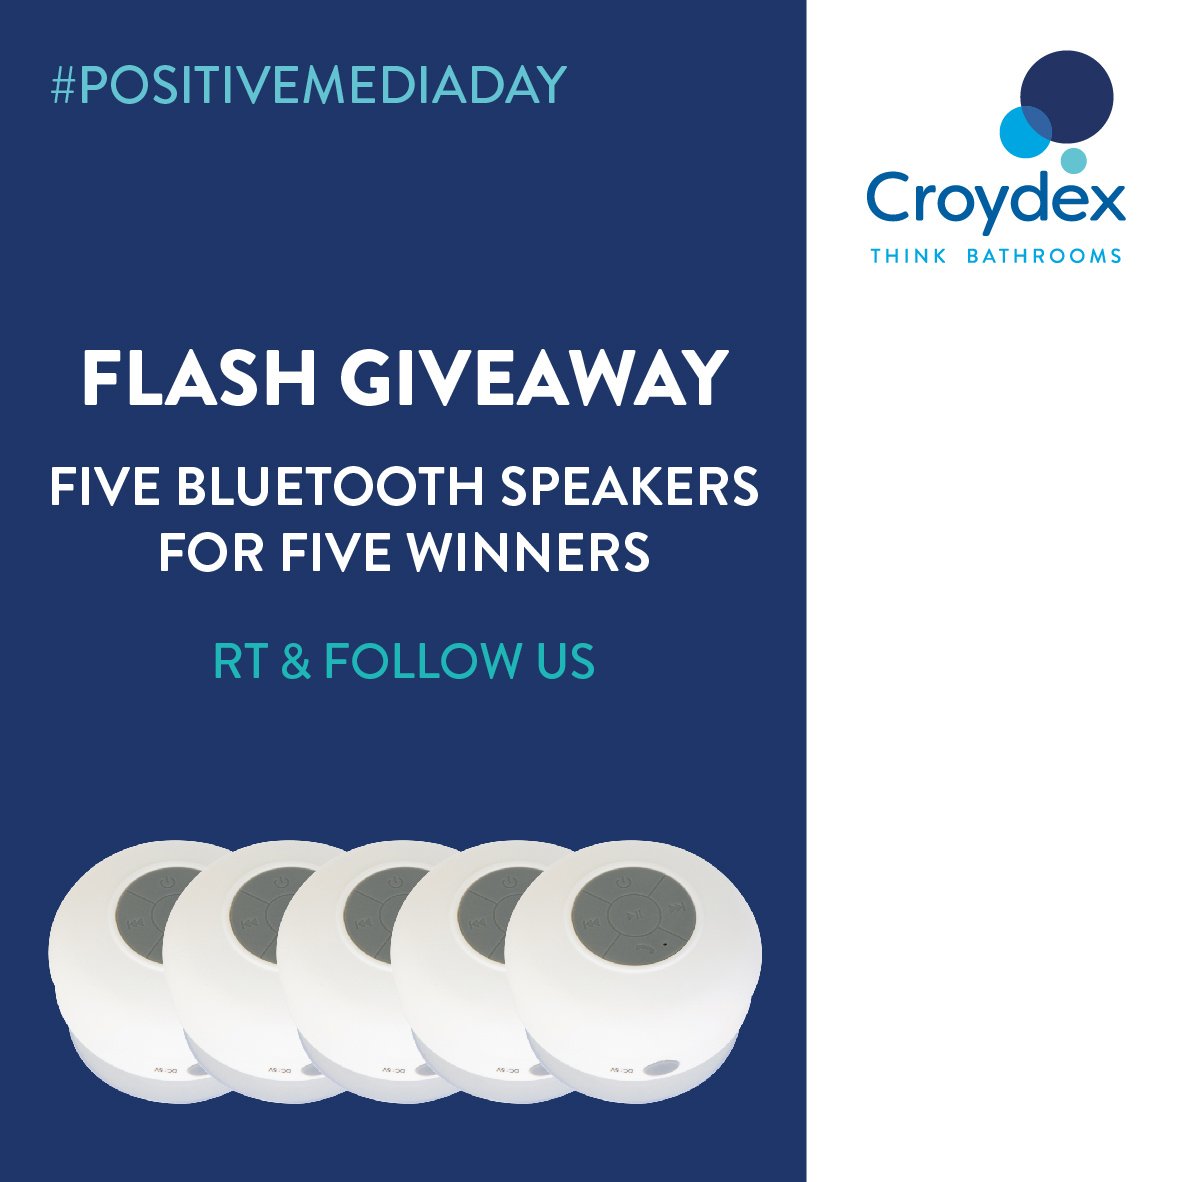 Today is #PositiveMediaDay, so we've got 5 Bathroom Bluetooth Speakers to give to 5 of our followers! RT and follow us and you could #win a Bathroom Bluetooth Speaker! Hurry, competition closes Monday at noon! #giveaway #win